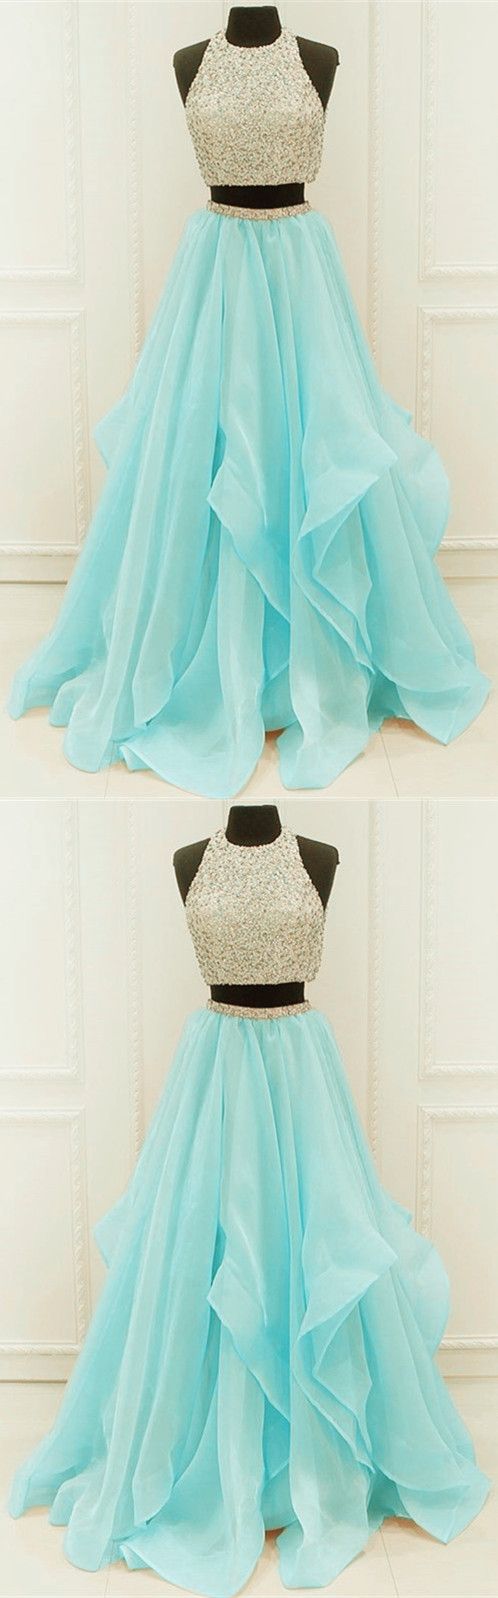 Chic Organza Ruffles Two Piece Prom Dresses With Sequins And Beads CD6374